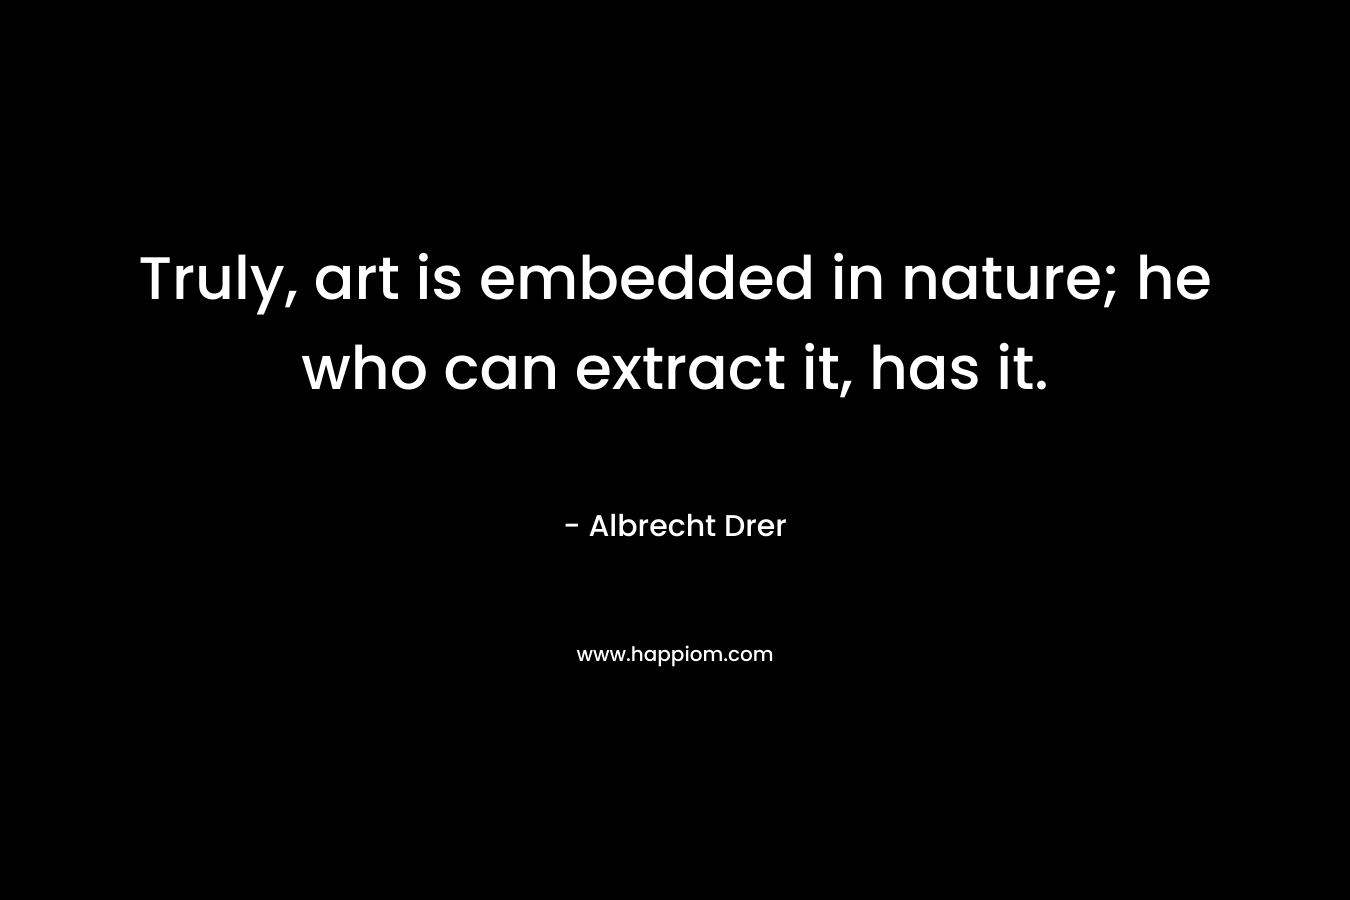 Truly, art is embedded in nature; he who can extract it, has it. – Albrecht Drer